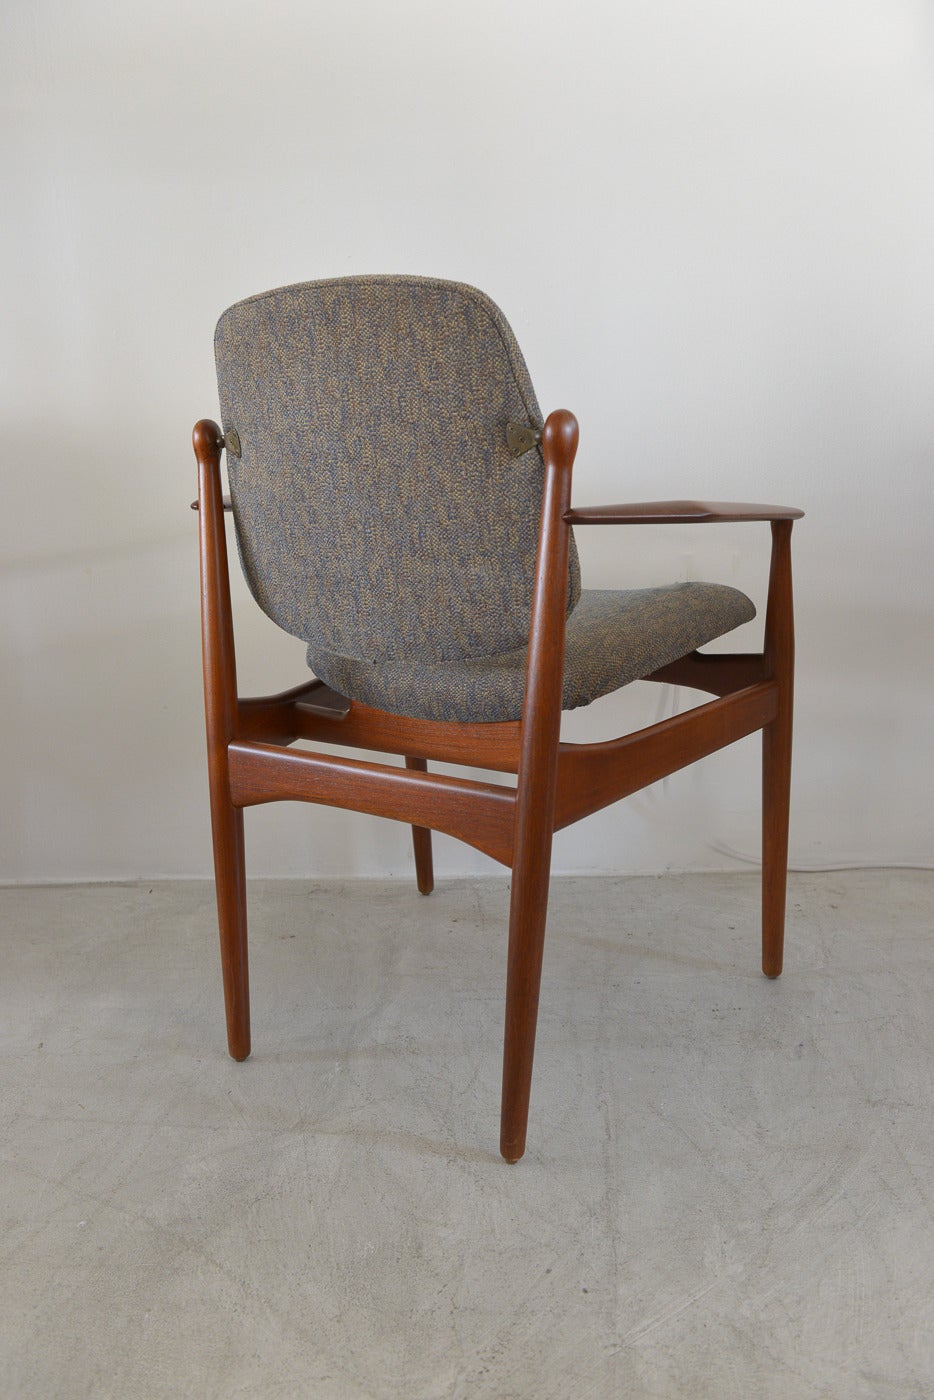 Swivel back teak armchair by Arne Vodder.  Wood has been restored to showroom condition.  Perfect chair for a desk, accent or side chair, or to add to your dining set for an extra captains chair.  Great neutral grey/brown/blue tweed fabric.

Back